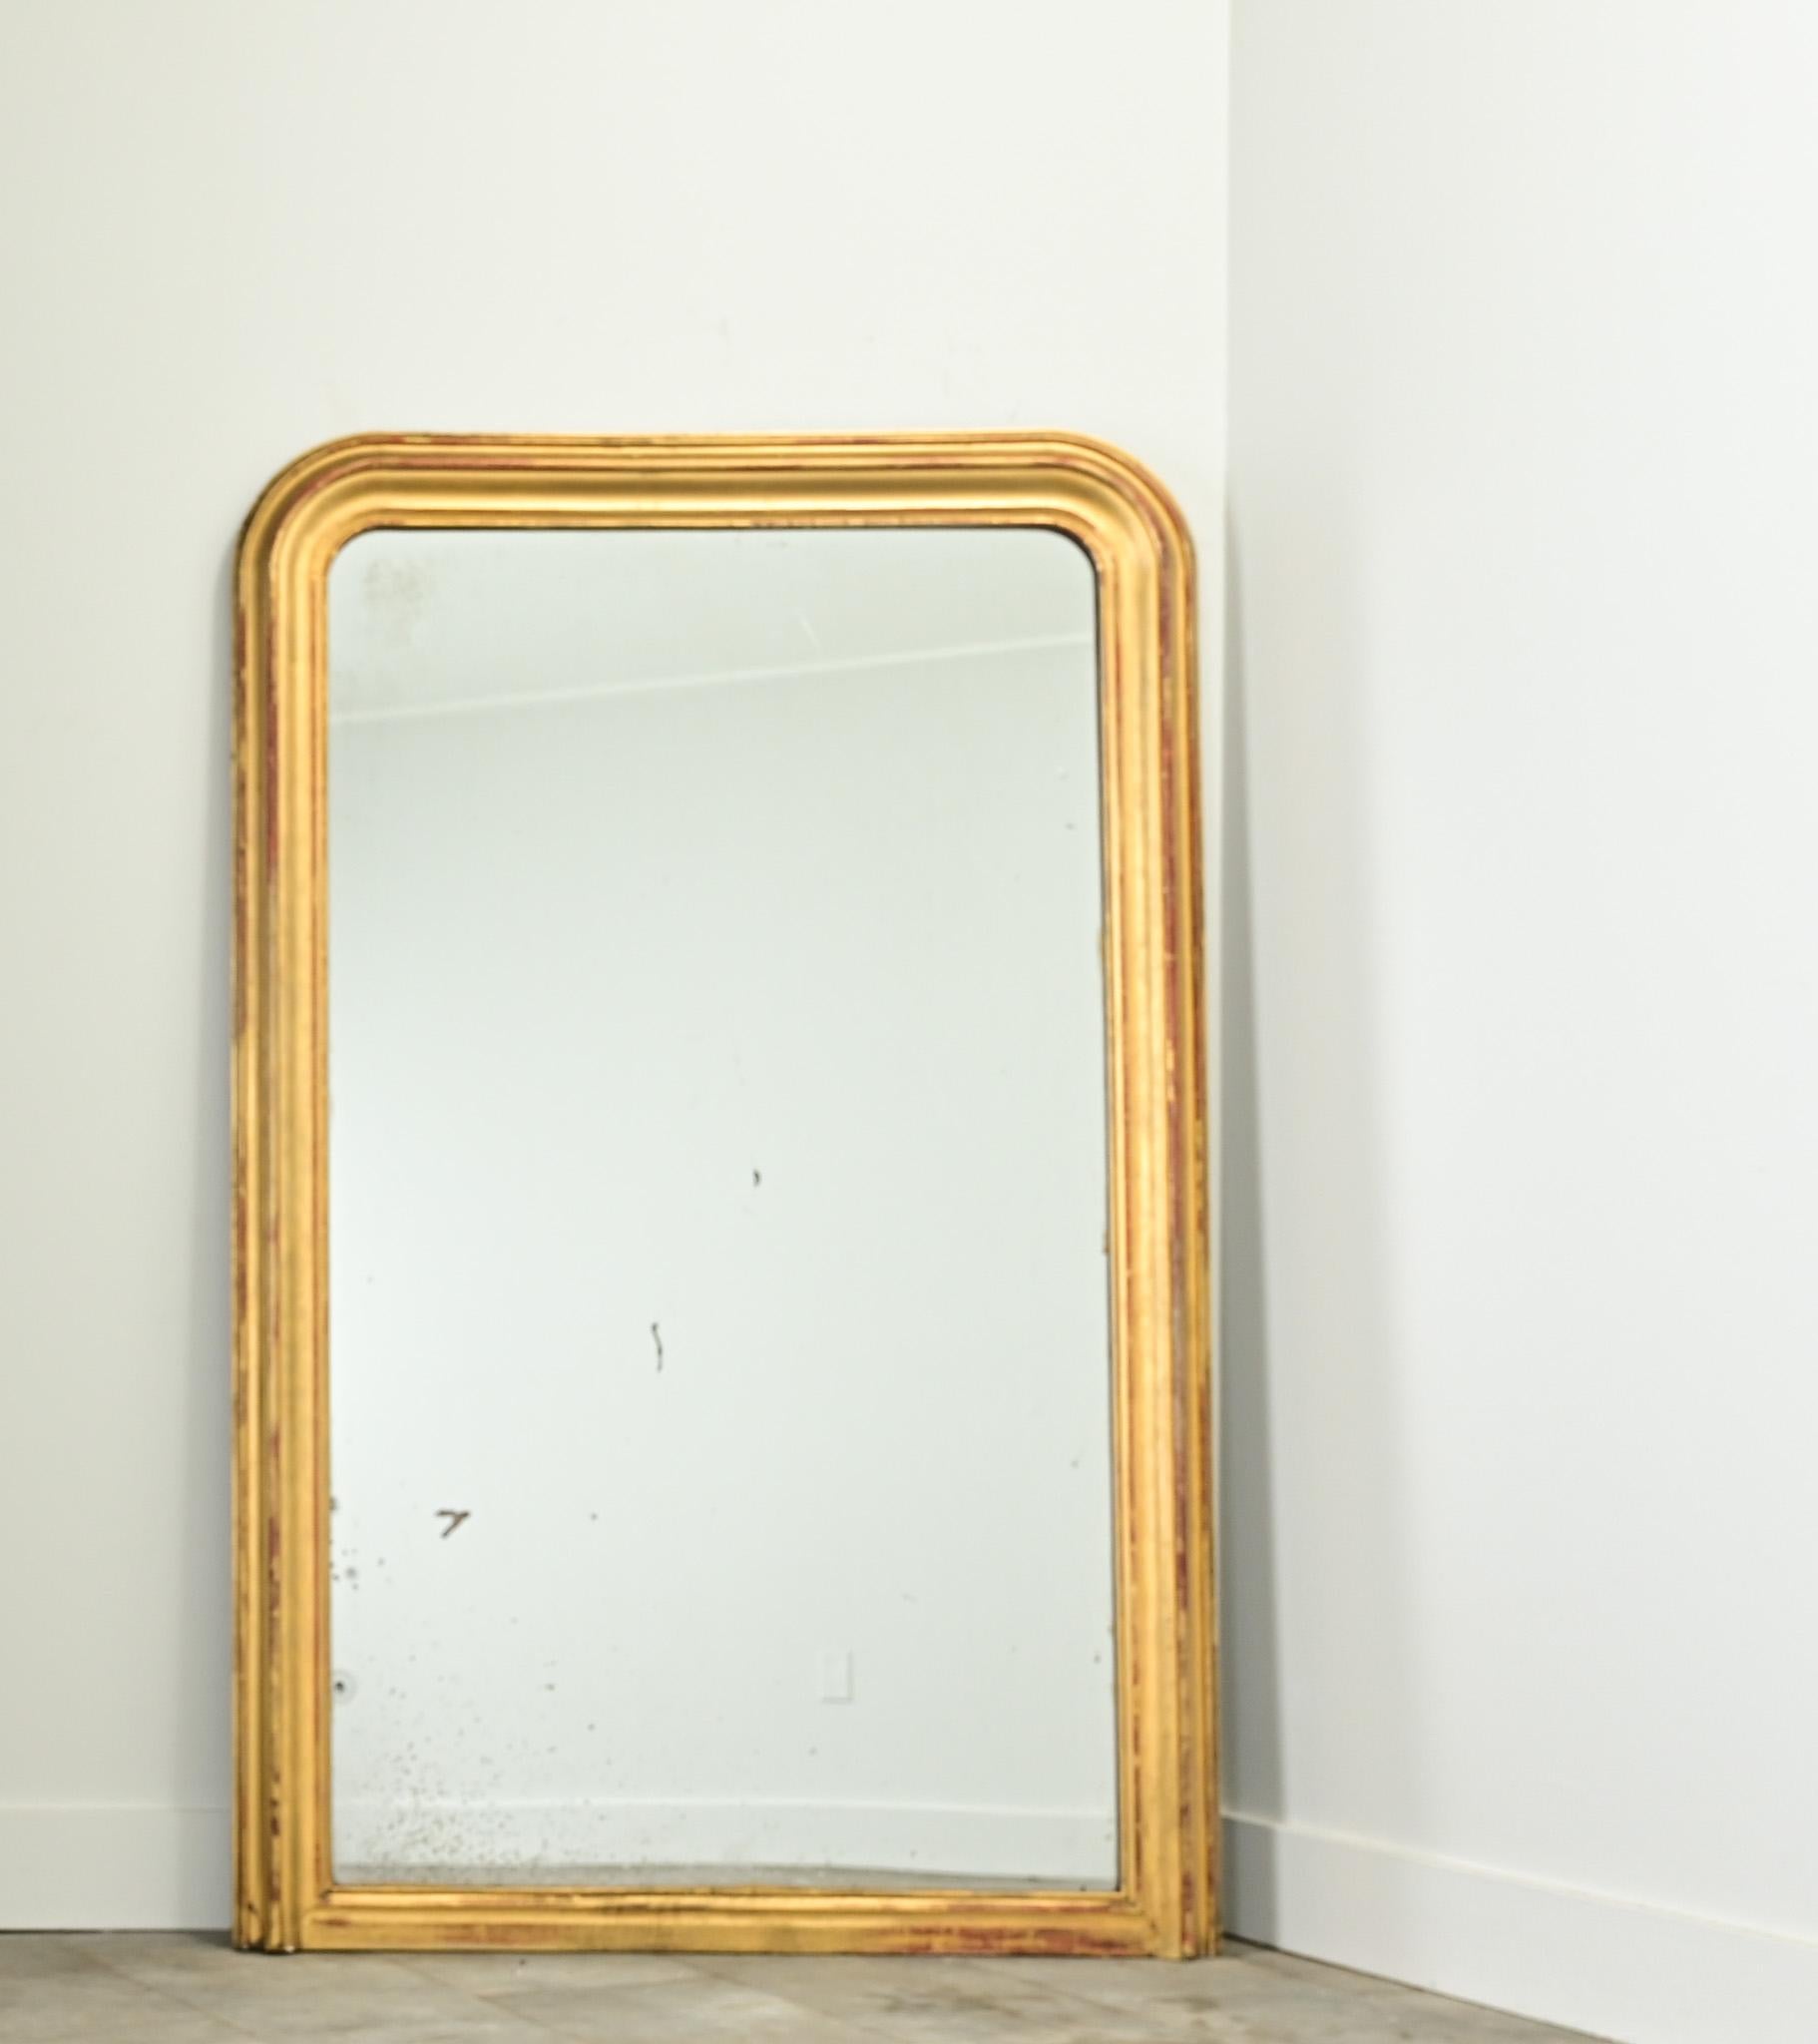 A French gold gilt Louis Philippe mirror from the 1800’s. The simple molded frame has rounded corners at the top and its original gold gilt finish, revealing the reddish bole beneath. The mirror plate is original and has light foxing and